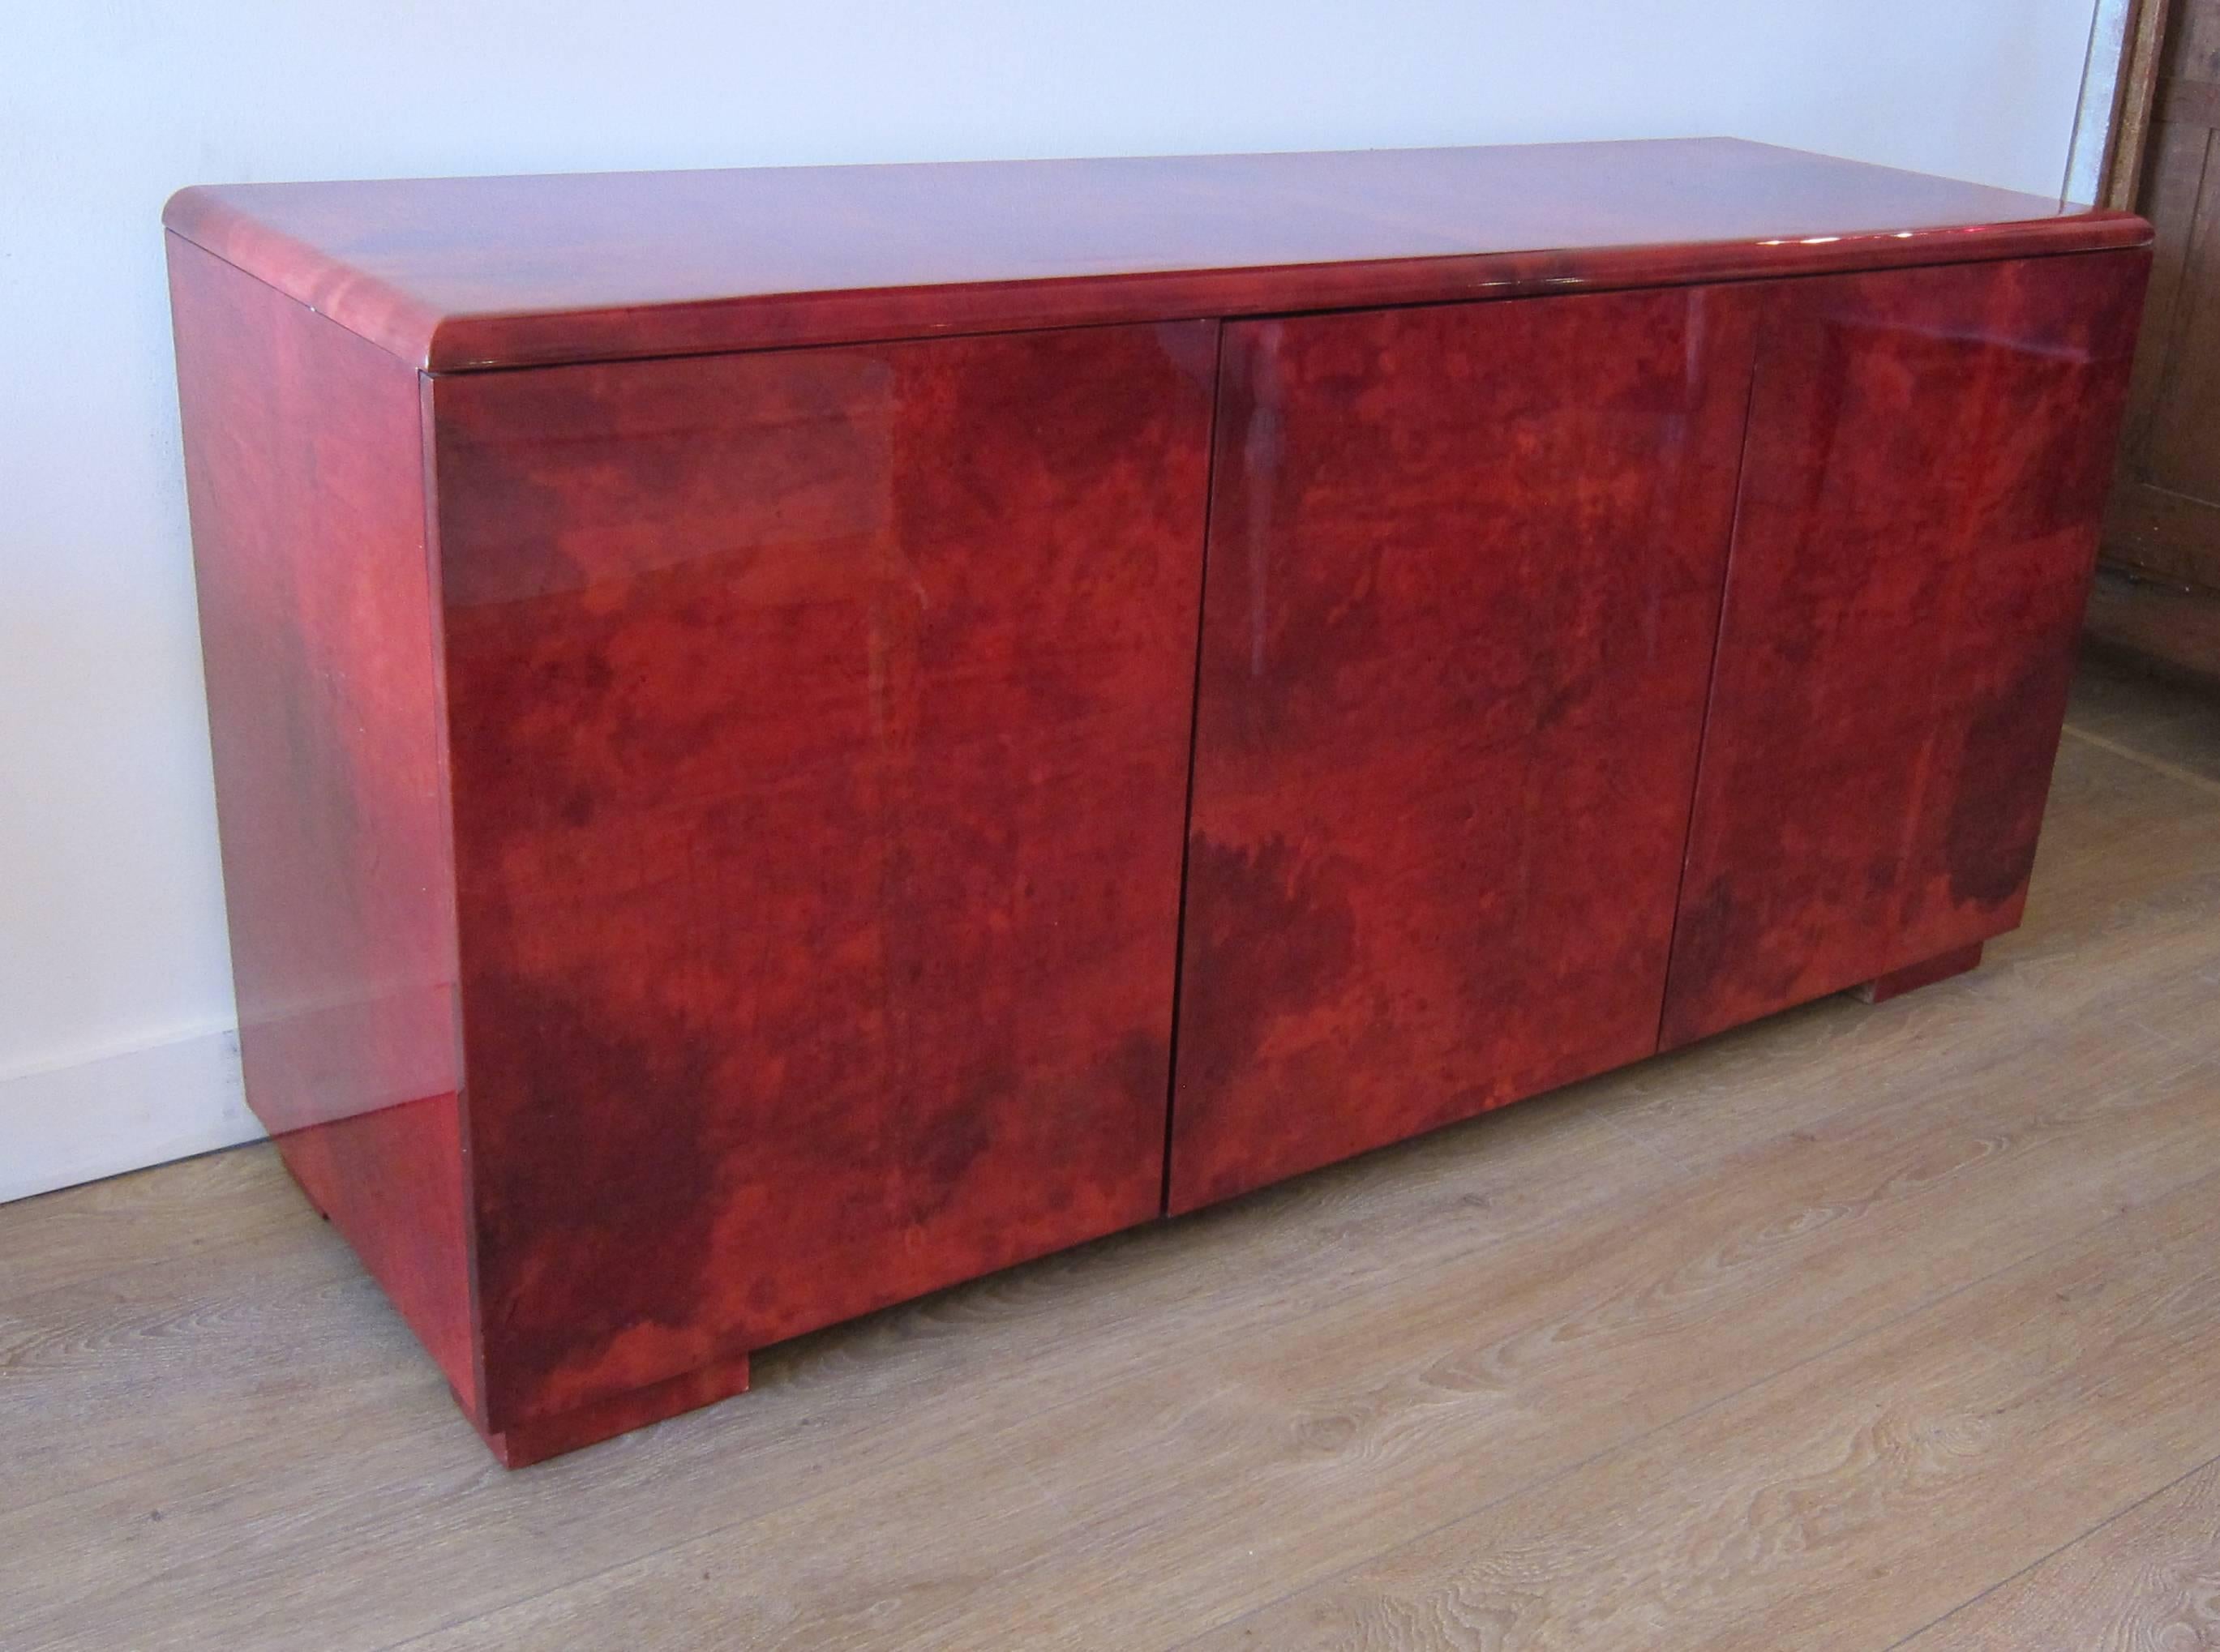 Rare vibrant red goatskin three doors cabinet by Aldo Tura, Italy, circa 1970s. Excellent vintage condition some light scratches on top. Vibrant and rich red goatskin.